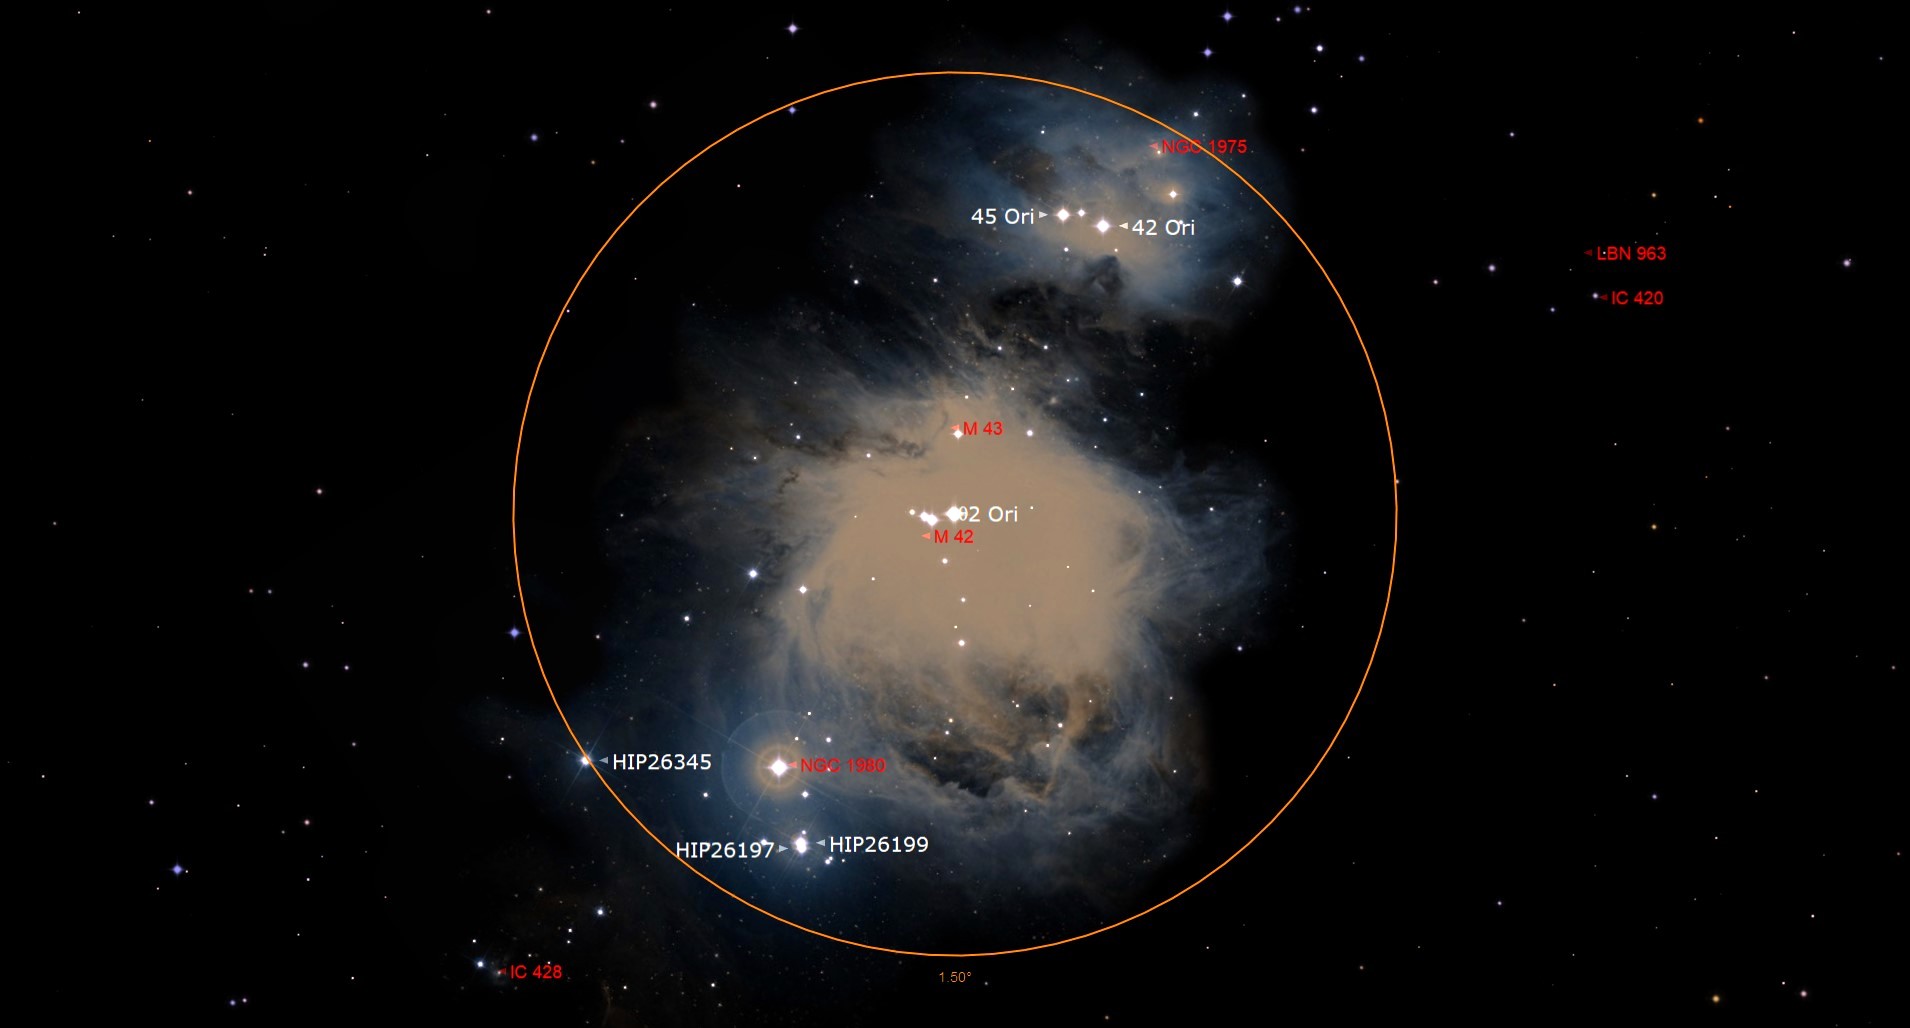 An illustration of the Orion nebula and the surrounding stars.